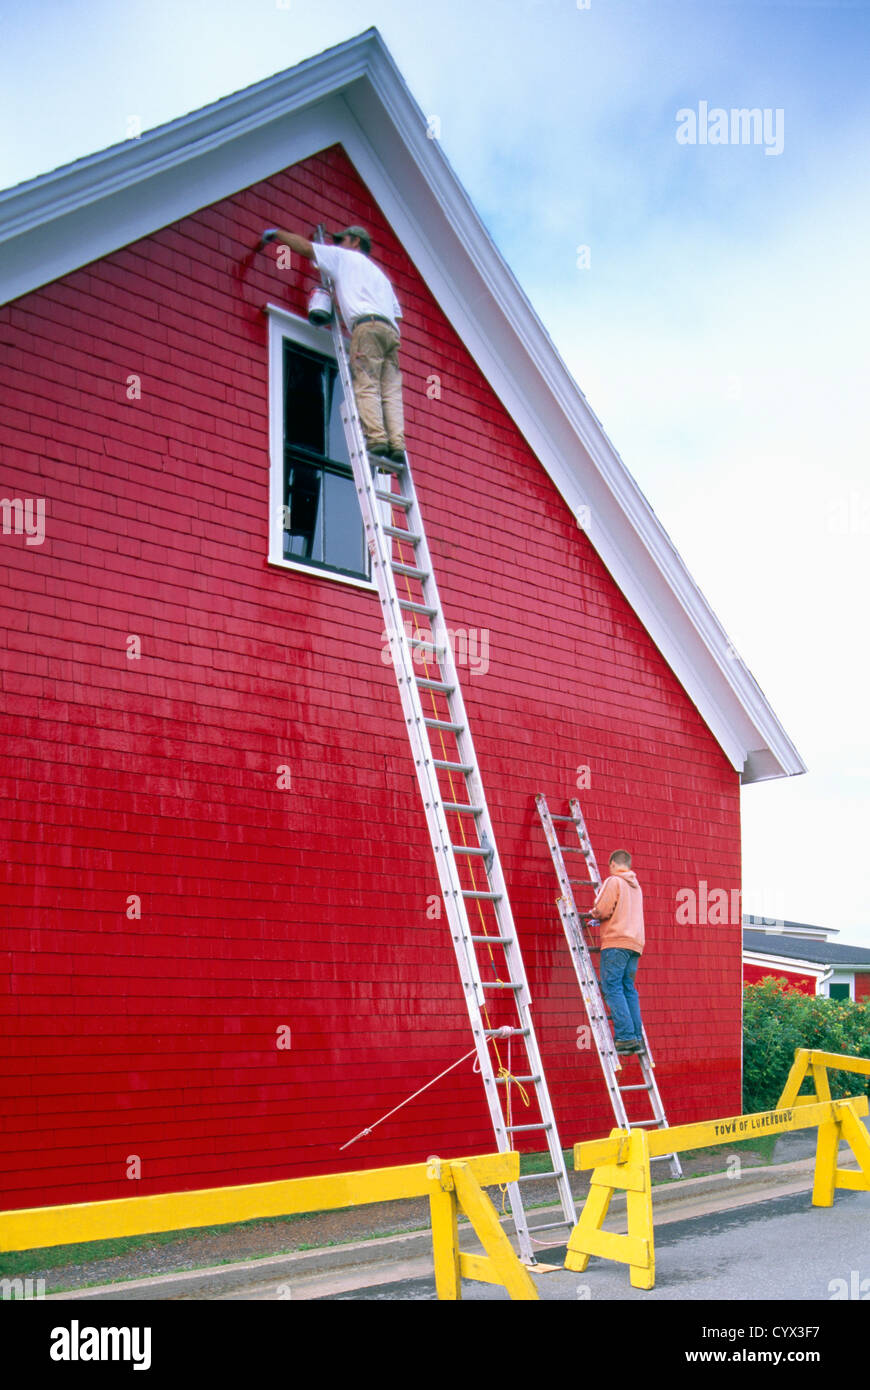 Painters standing on Ladders, painting Bright Red Paint on ...